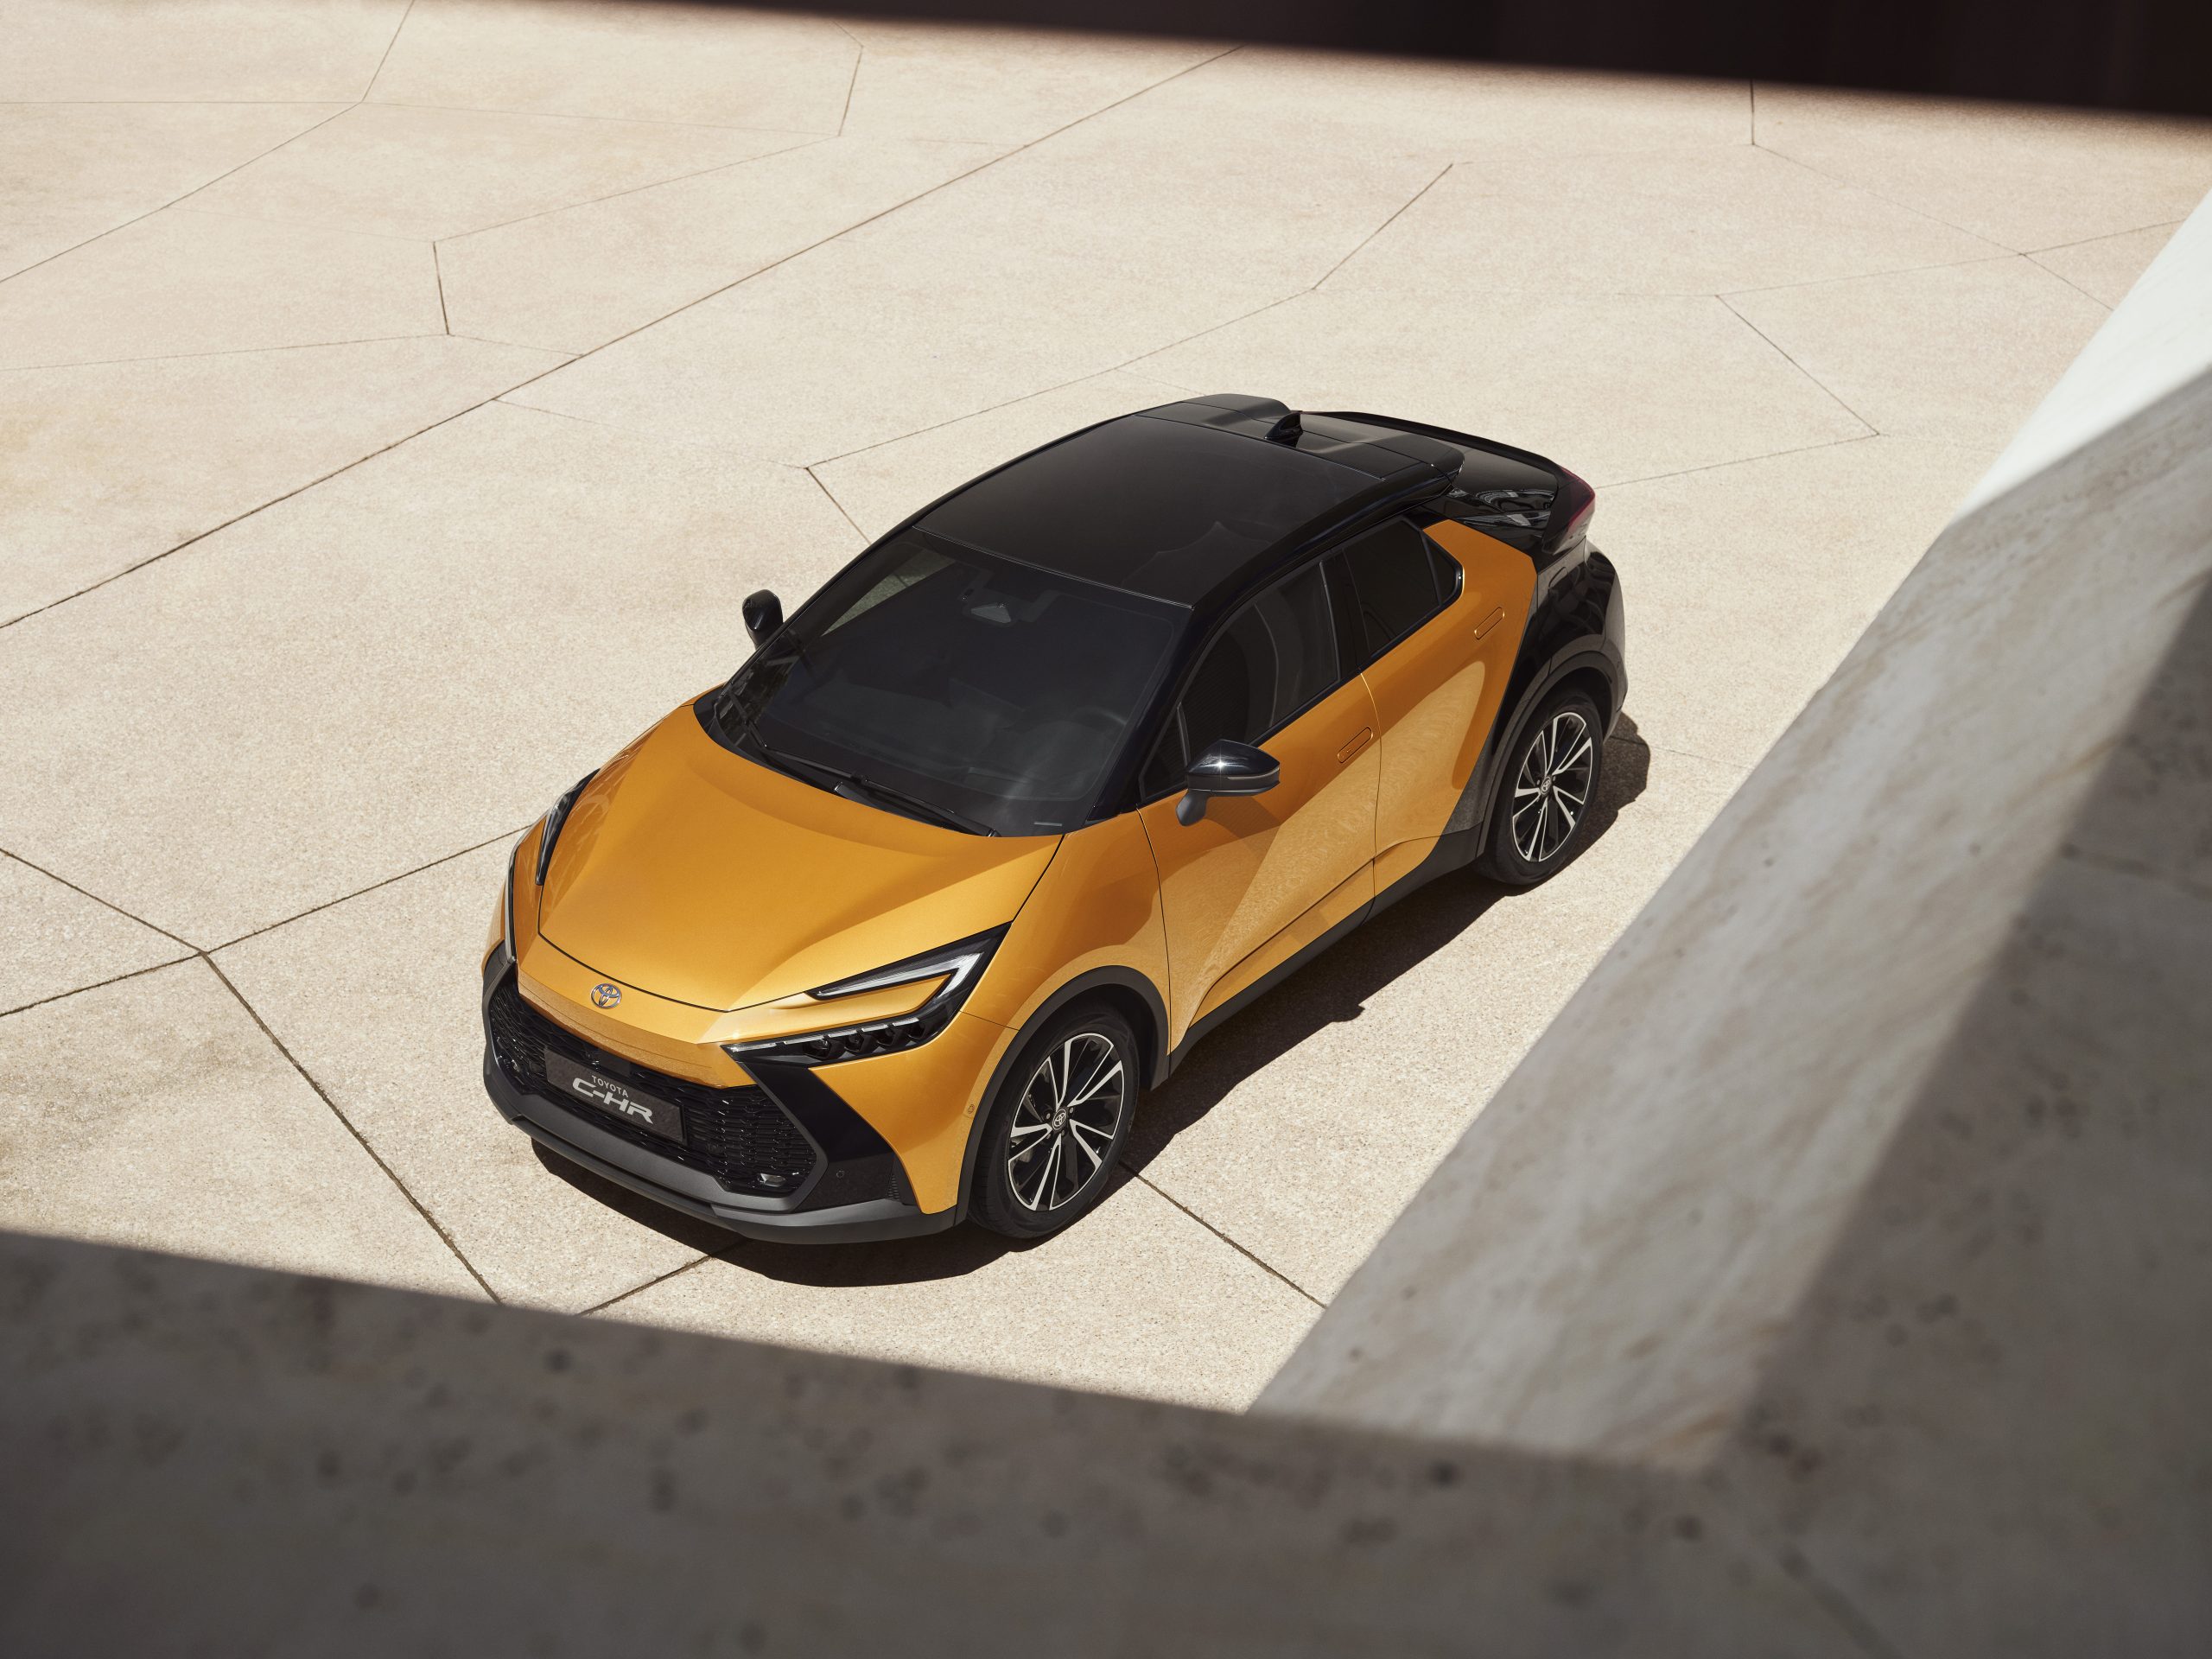 All-new Toyota C-HR prices and equipment details - Toyota Media Site